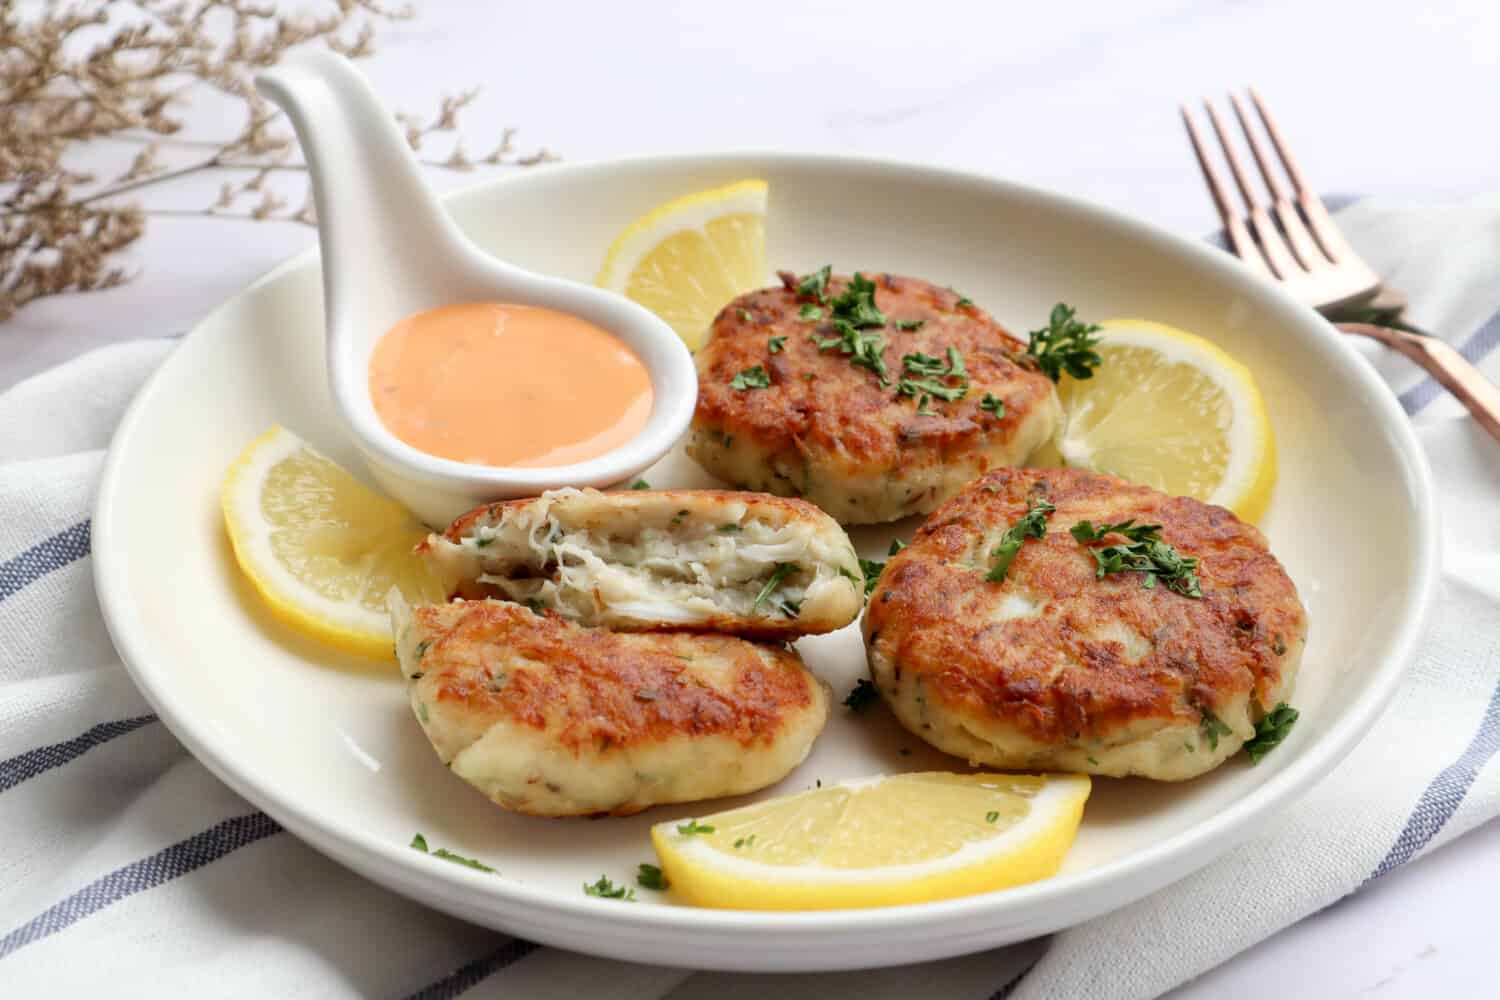 Crab cake with remoulade sauce and lemon in a white plate at close up view - healthy seafood appetizer